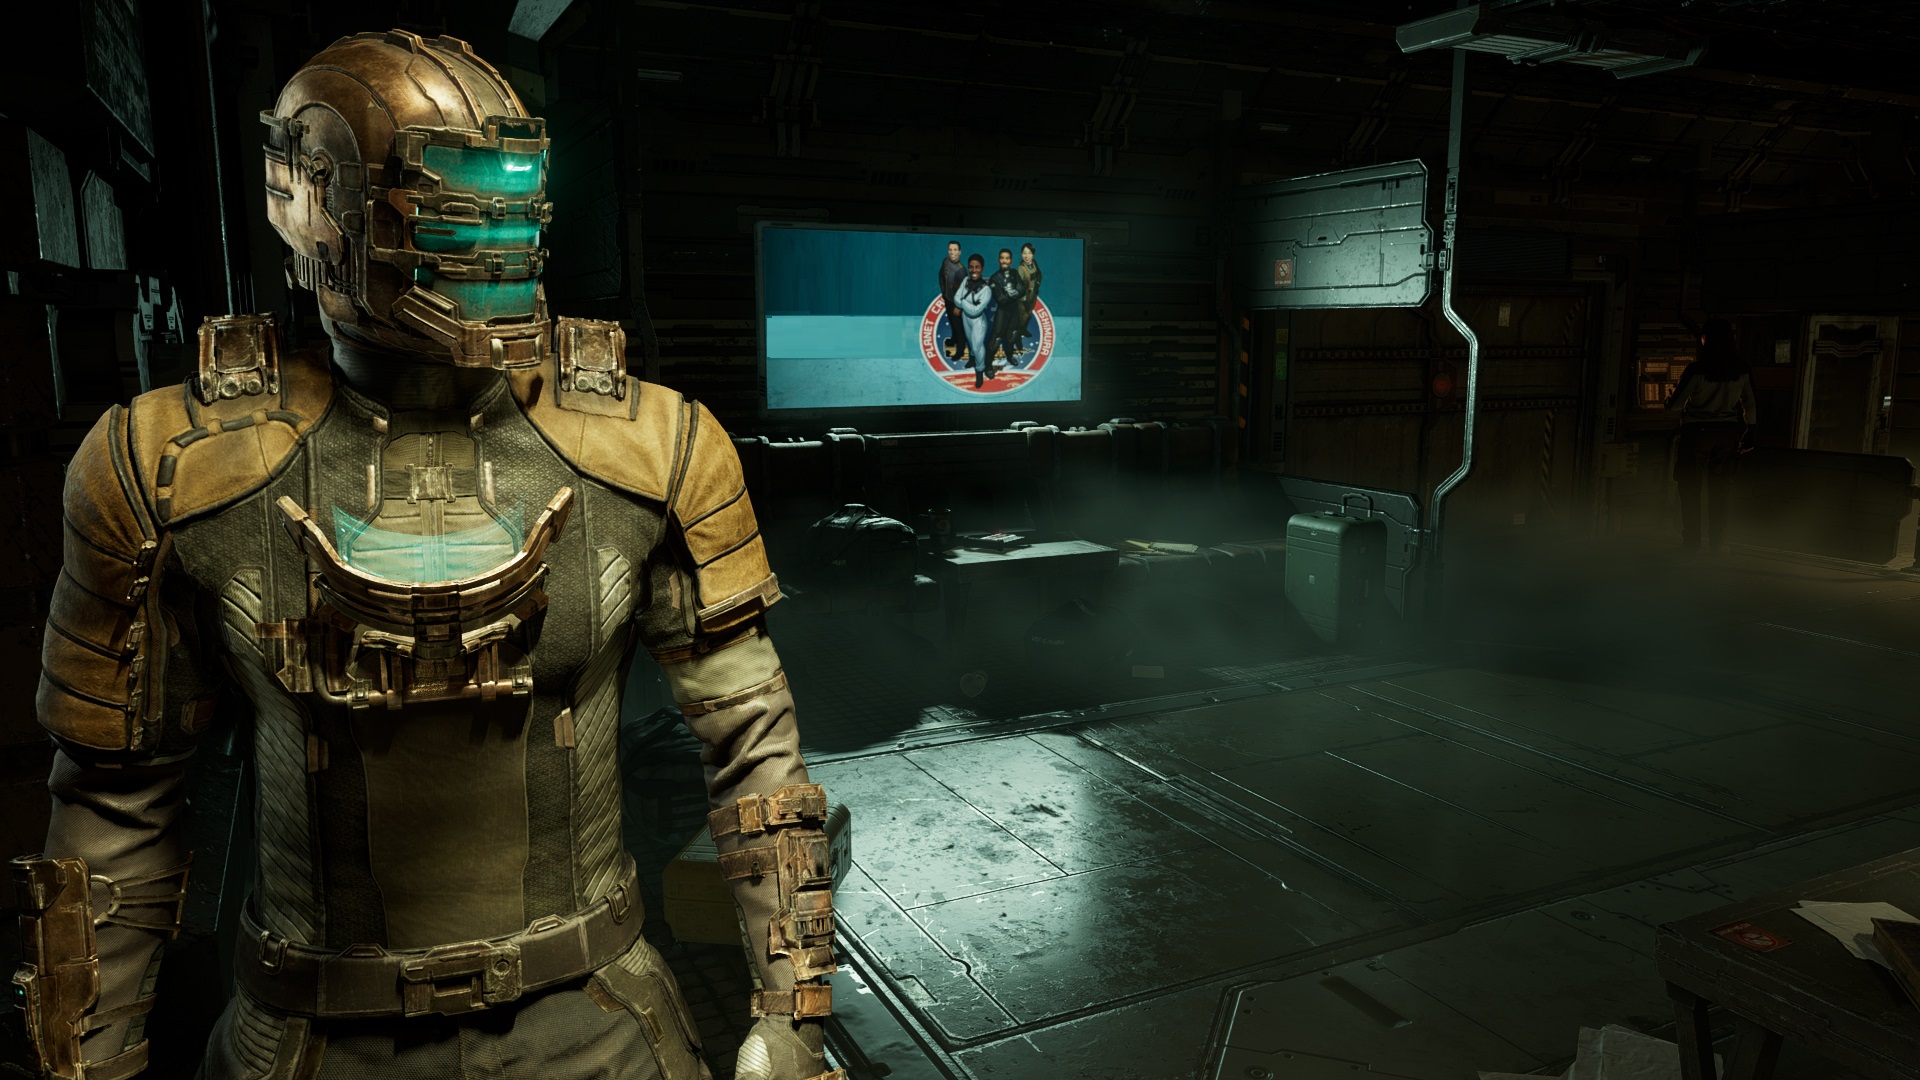 Dead Space 4 needs to ditch action and go back to horror